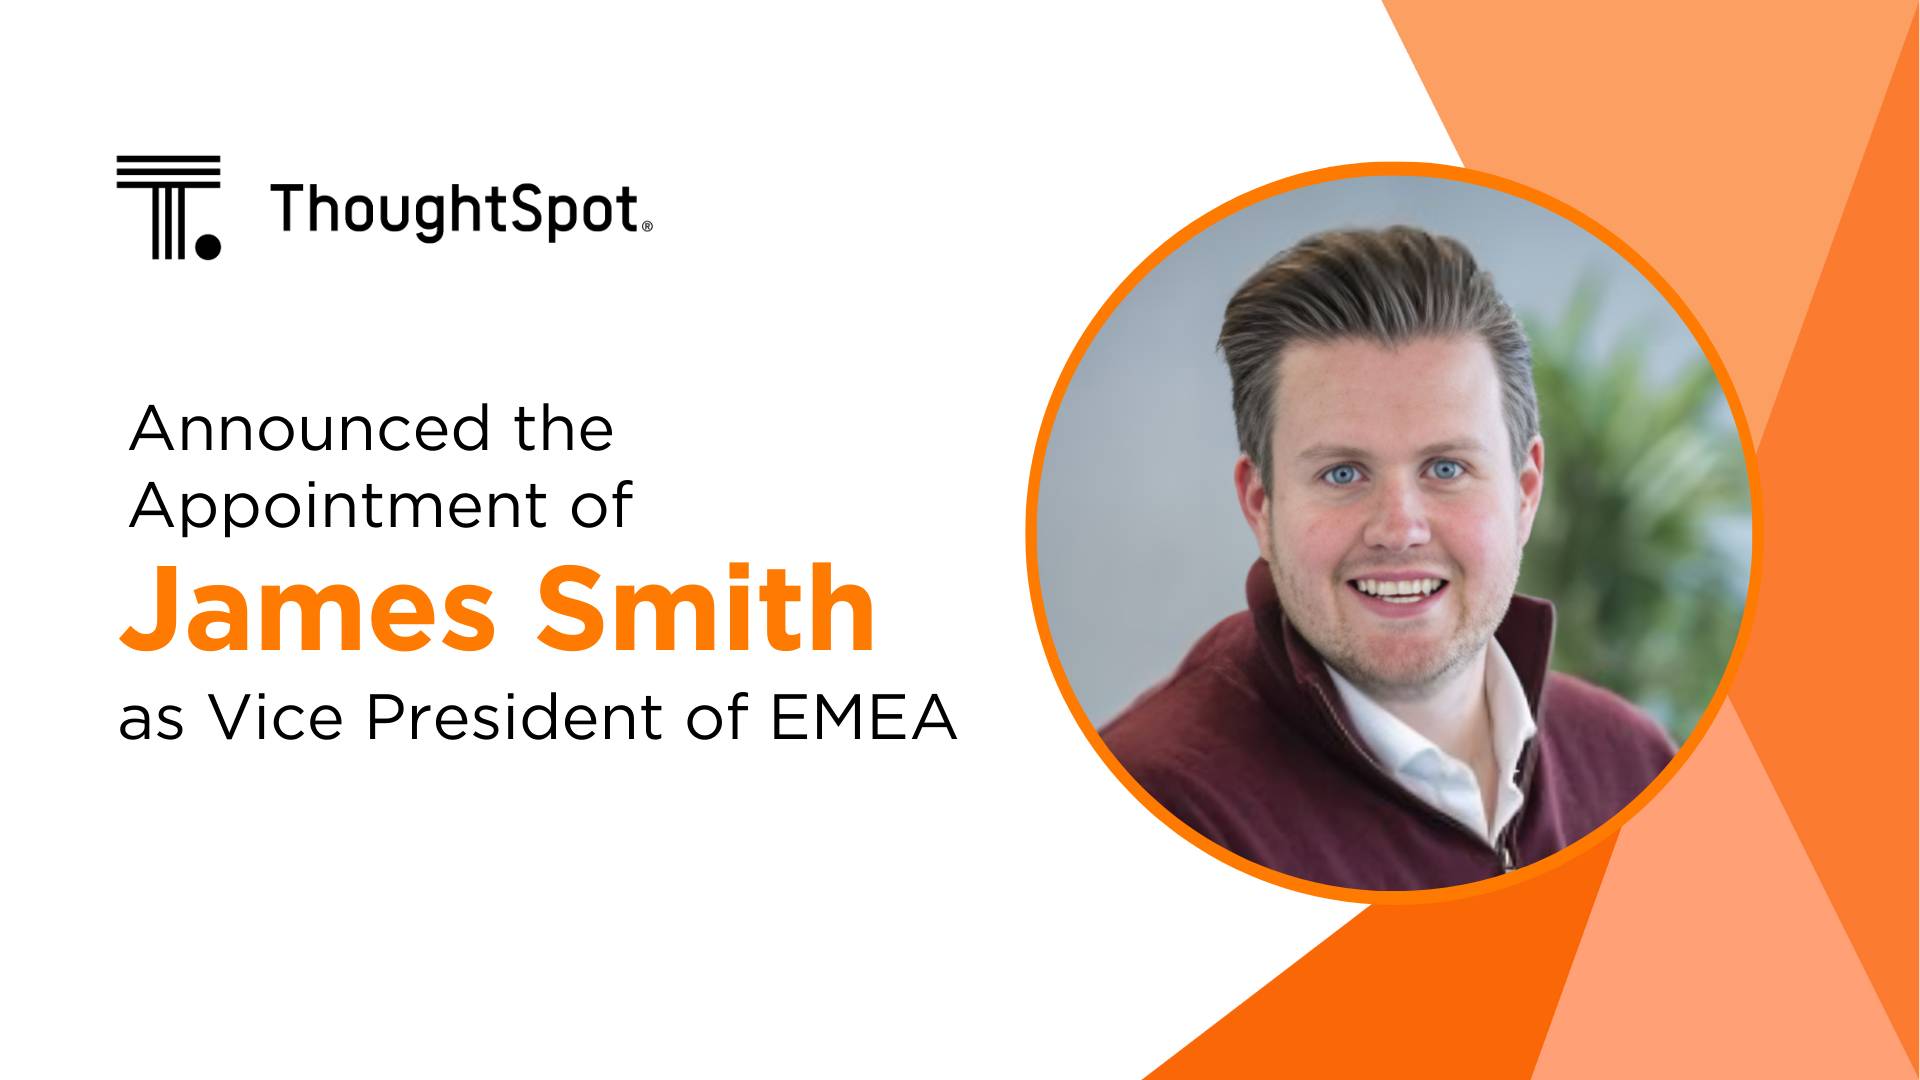 ThoughtSpot Appoints James Smith as VP of EMEA, Accelerating Data-driven Transformation